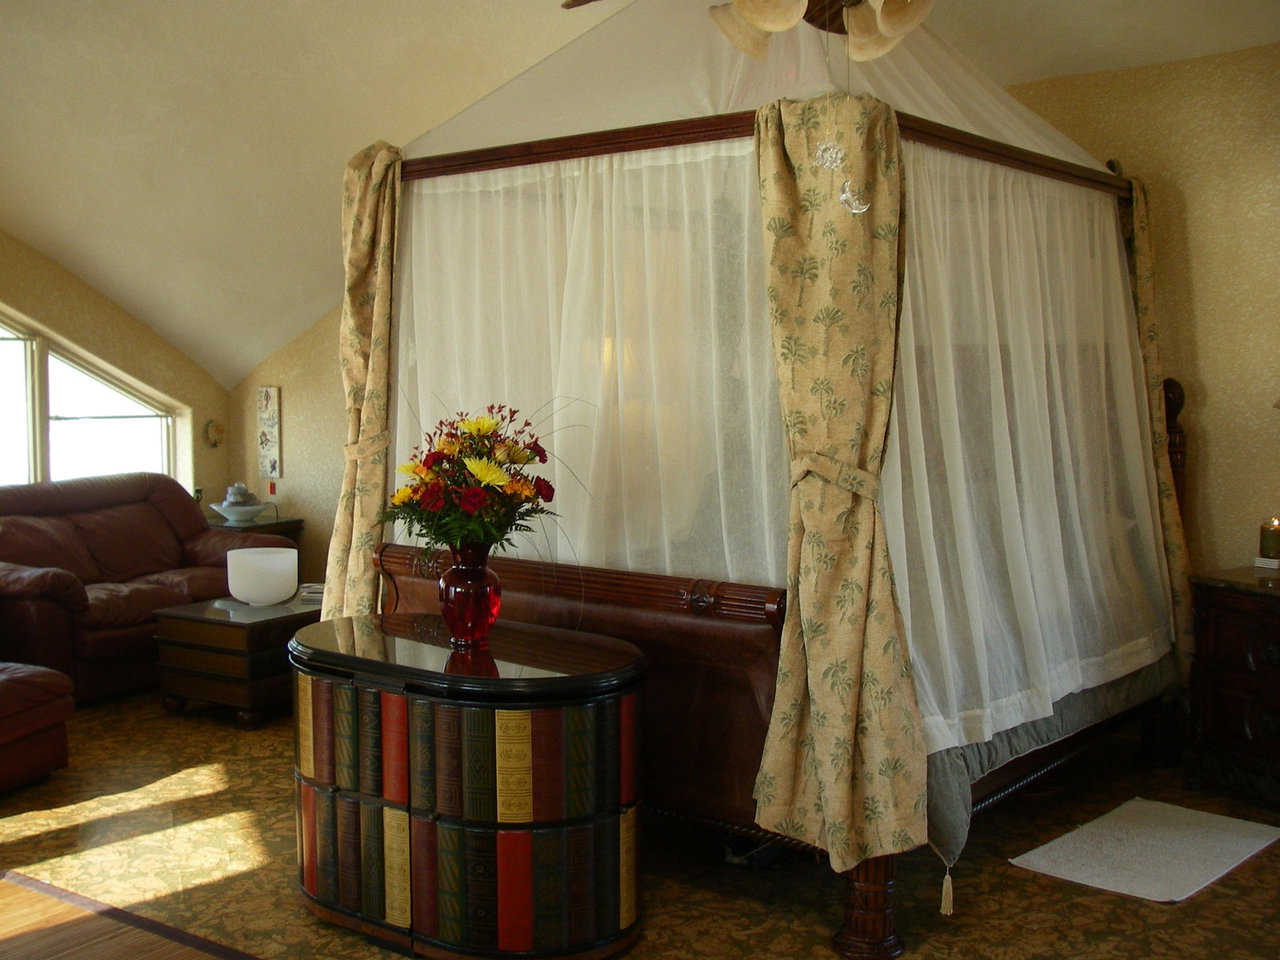 Ultimate privacy — This master bedroom features a canopied, fully curtained queen-size bed.